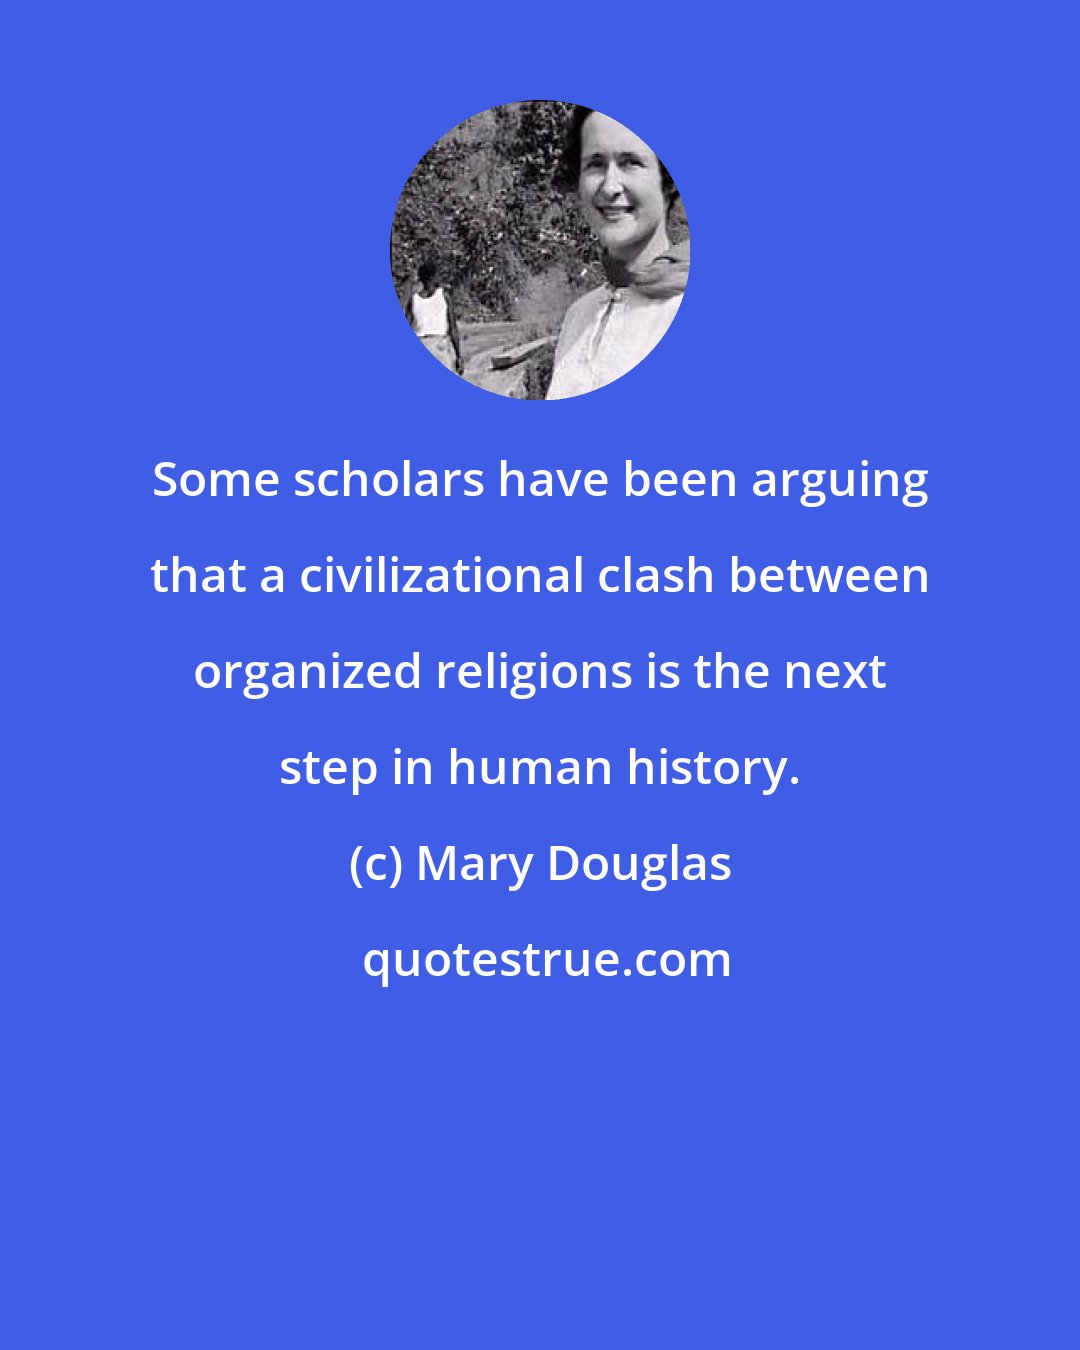 Mary Douglas: Some scholars have been arguing that a civilizational clash between organized religions is the next step in human history.